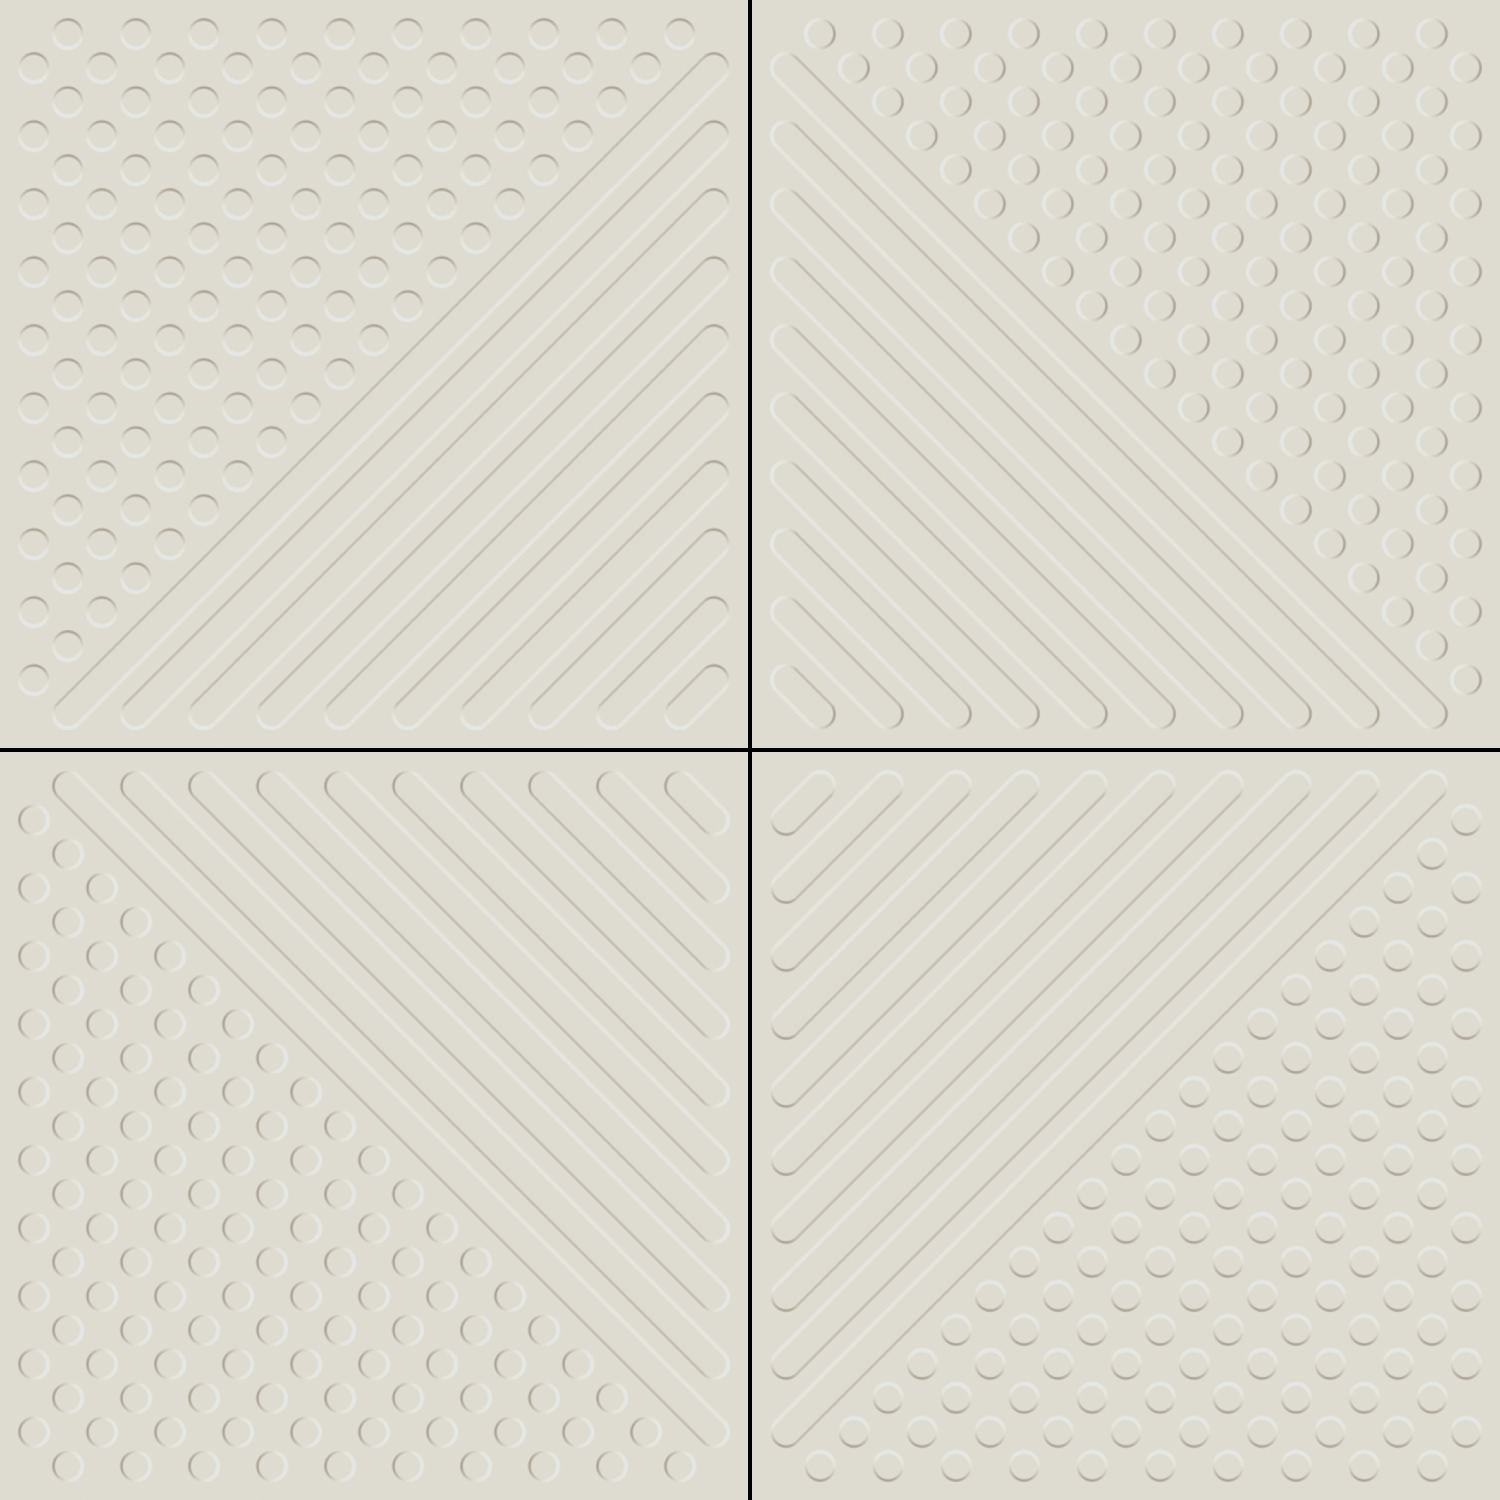 Tab Button Ordinary Ivory Parking Tiles
